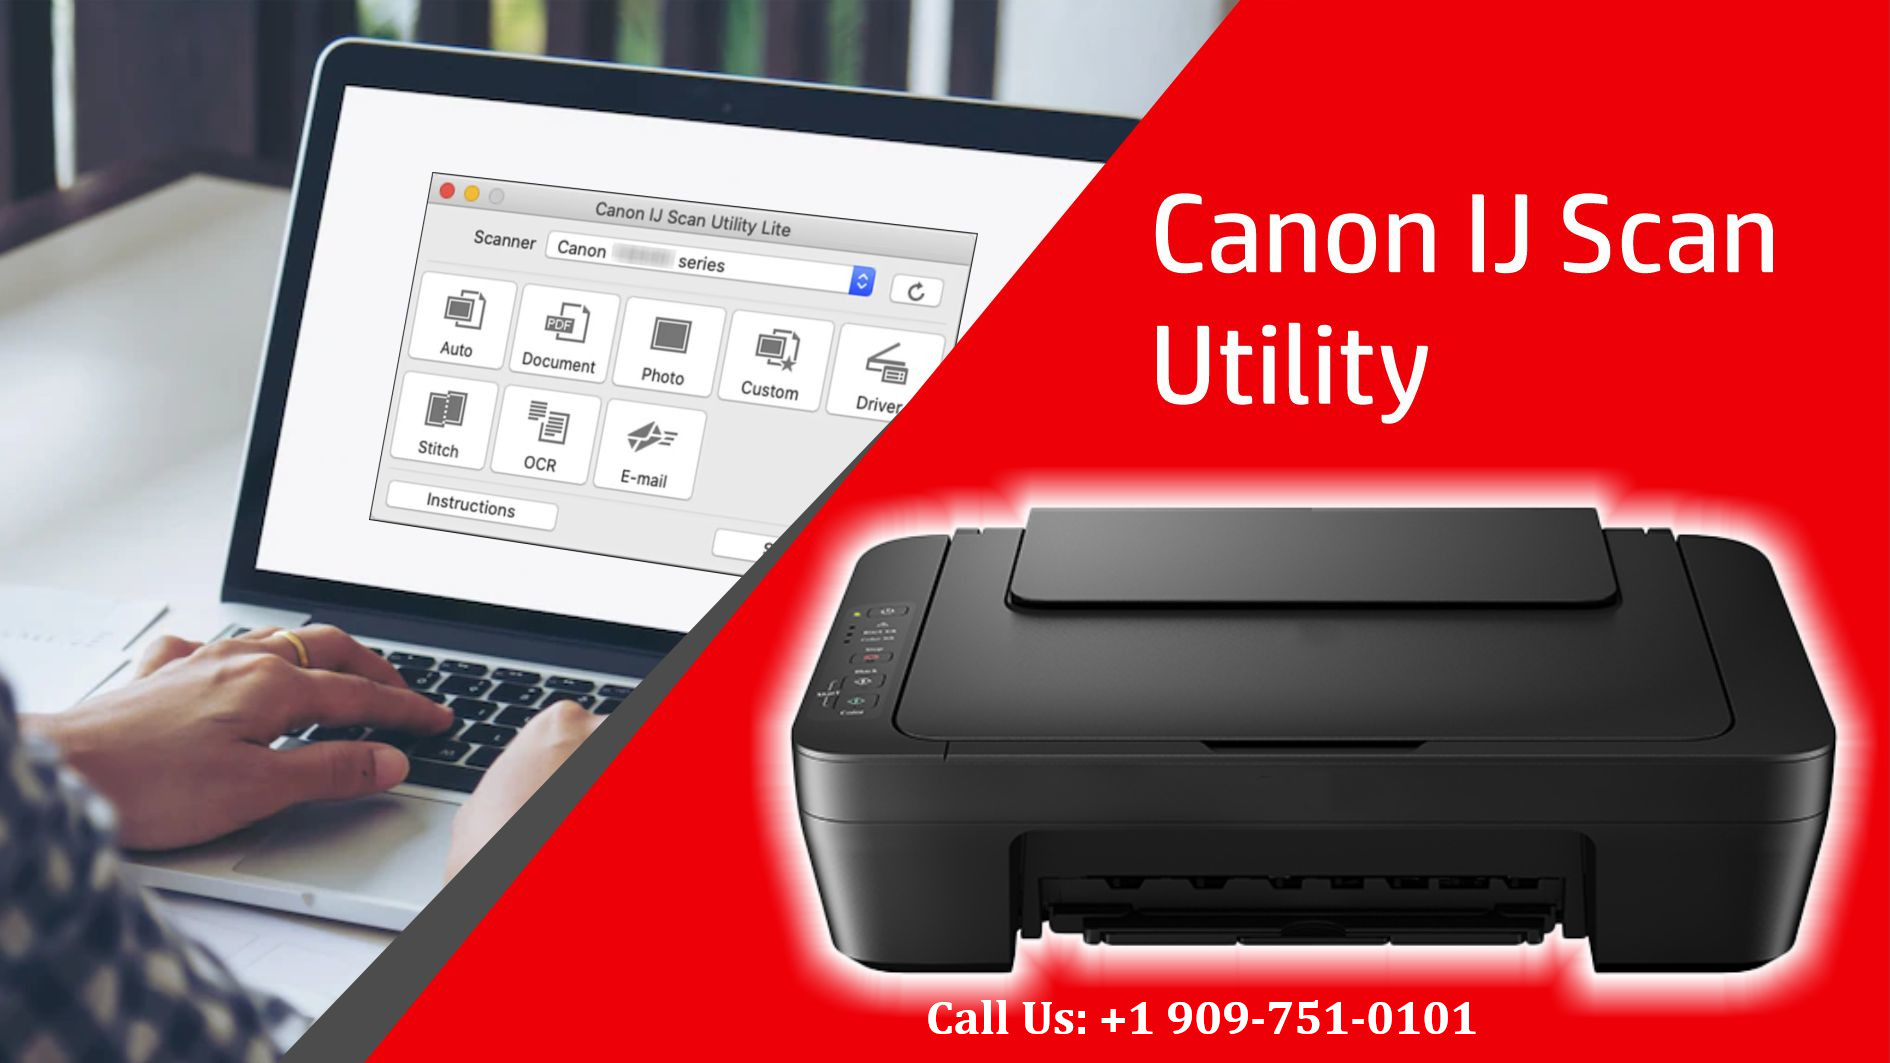 canon ij scan utility